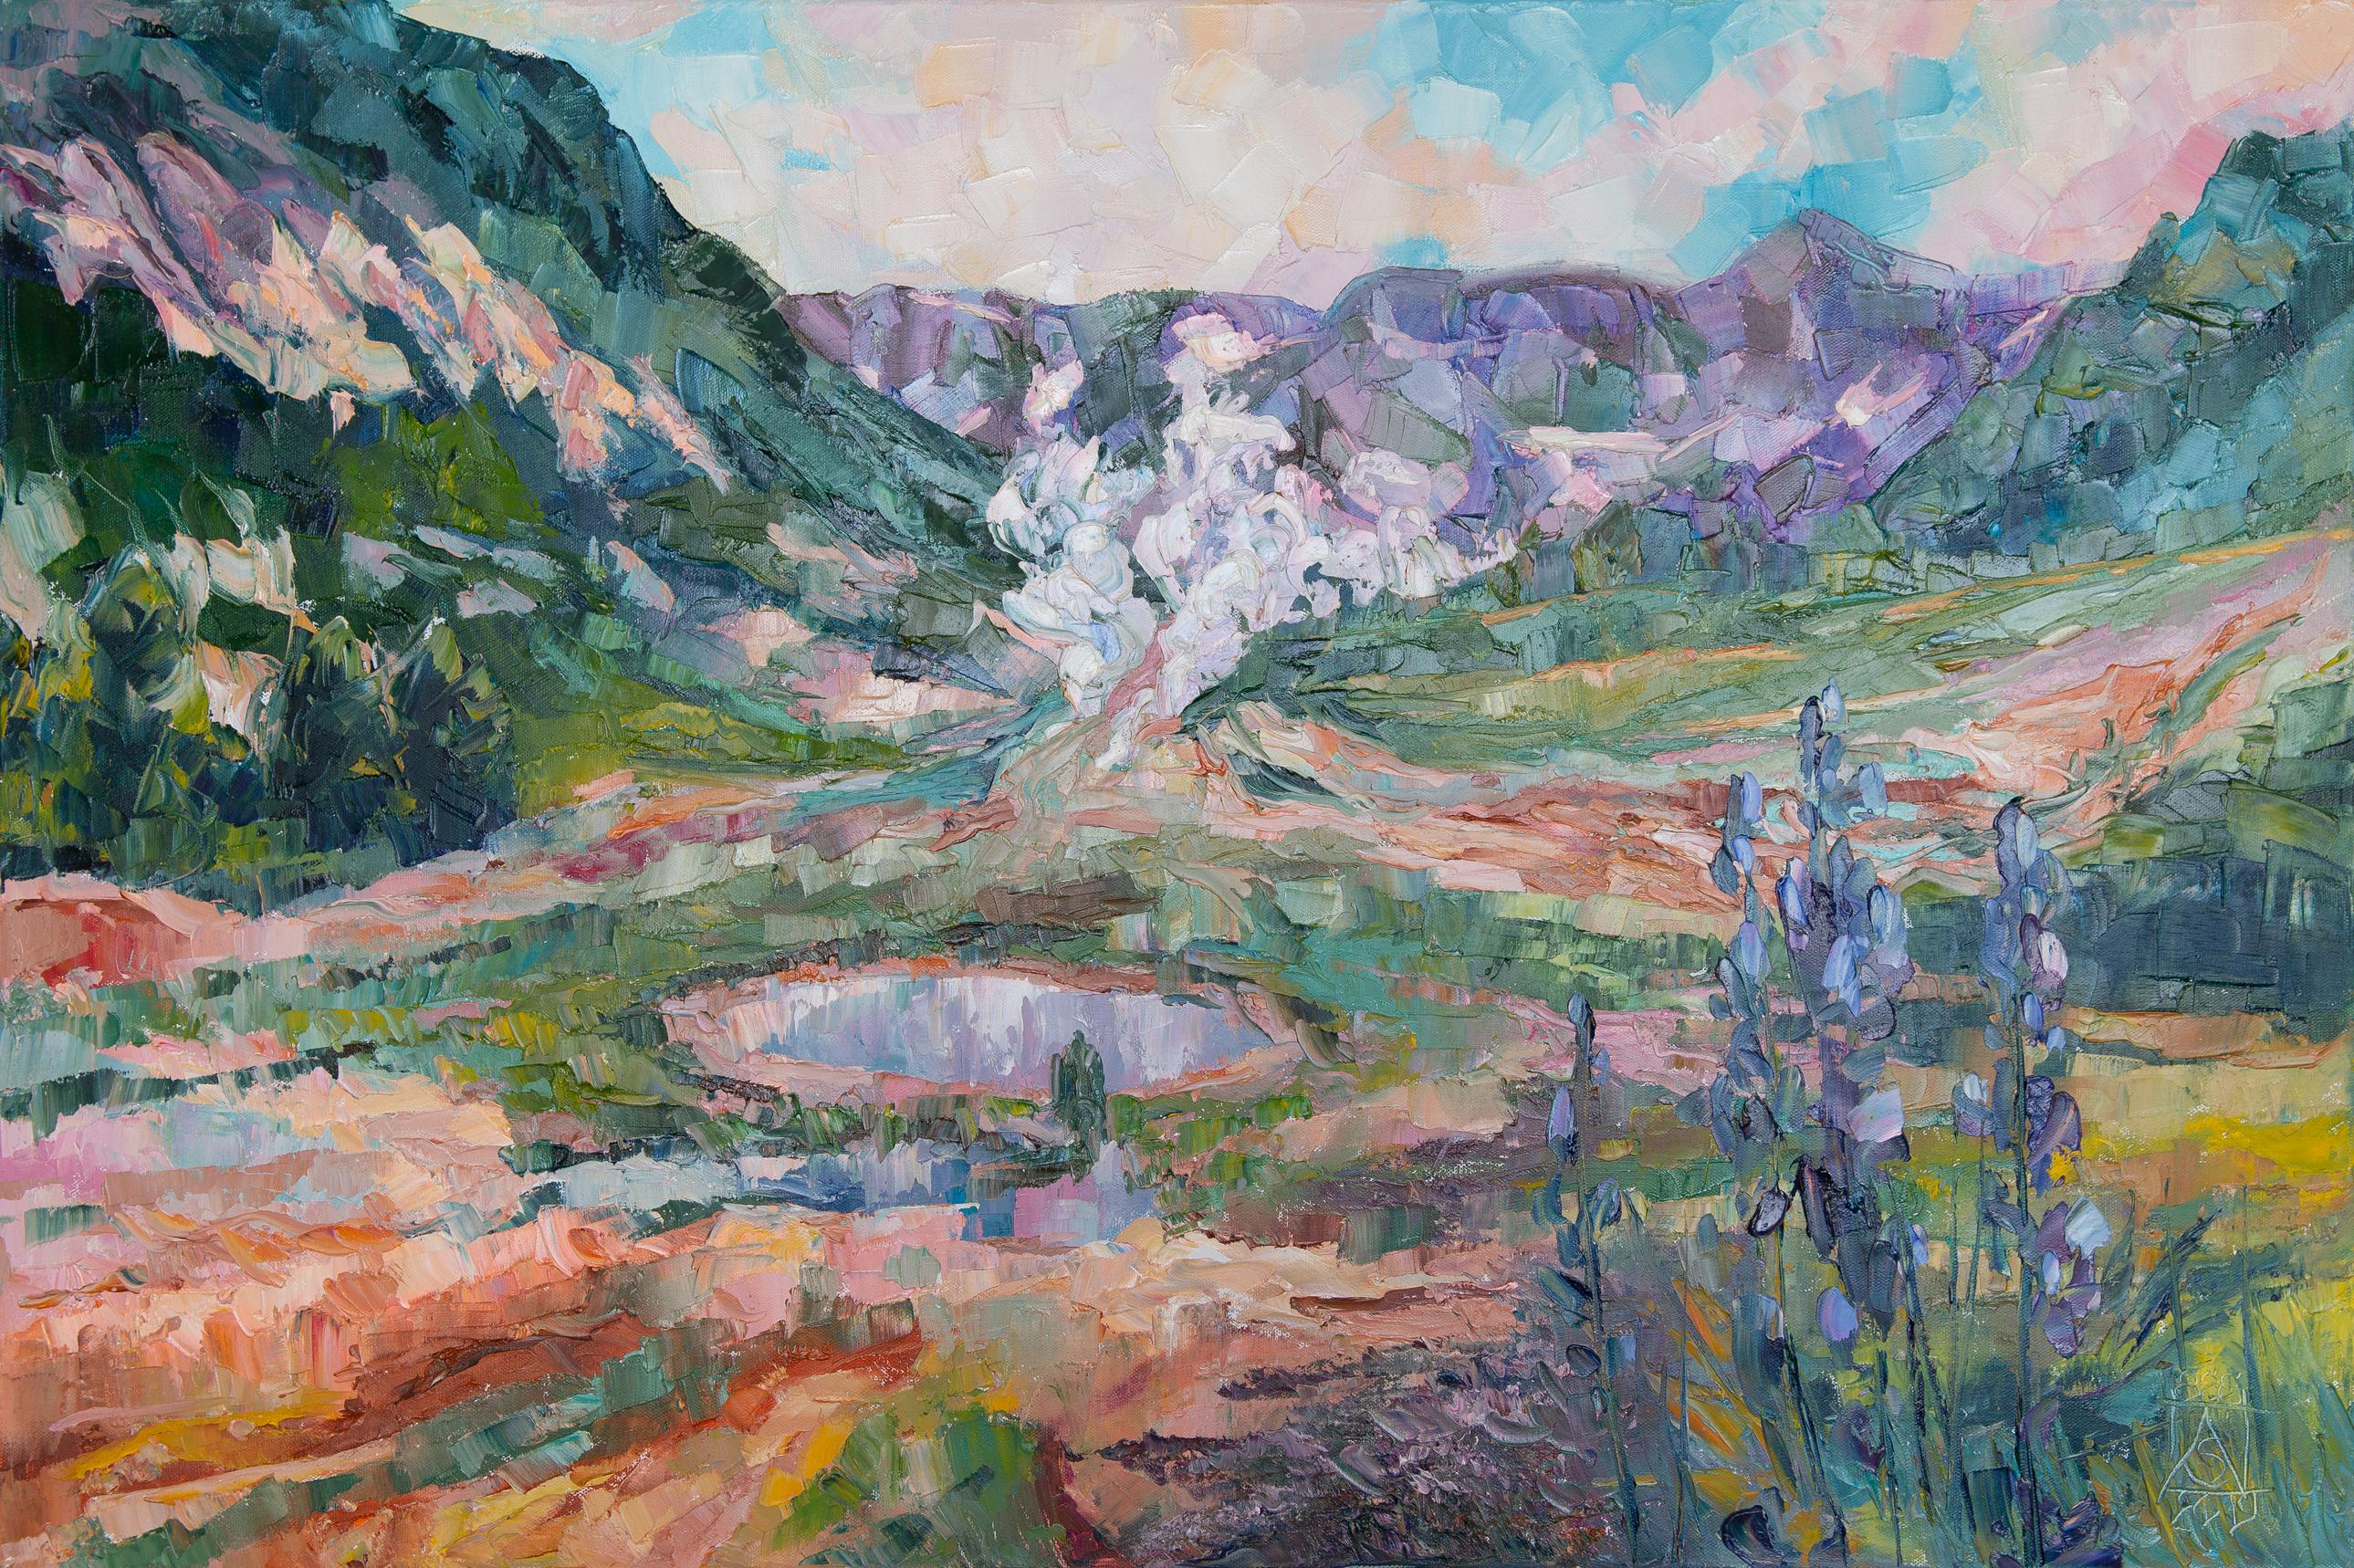 Anna Shesterikova Landscape Painting - The Valley of Geysers